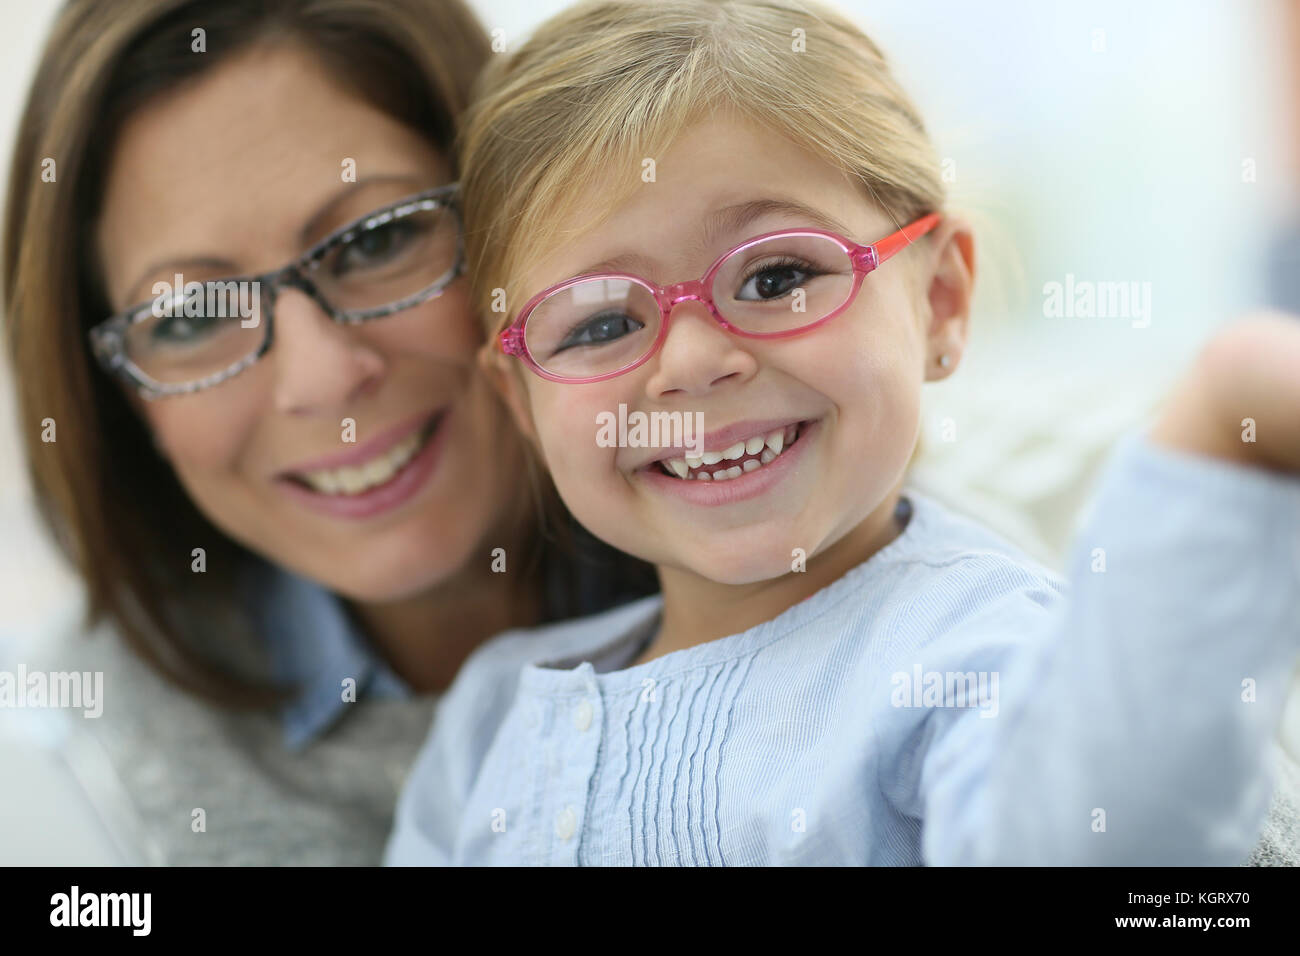 Portrait of mother and daughter wearing eyeglasses Stock Photo